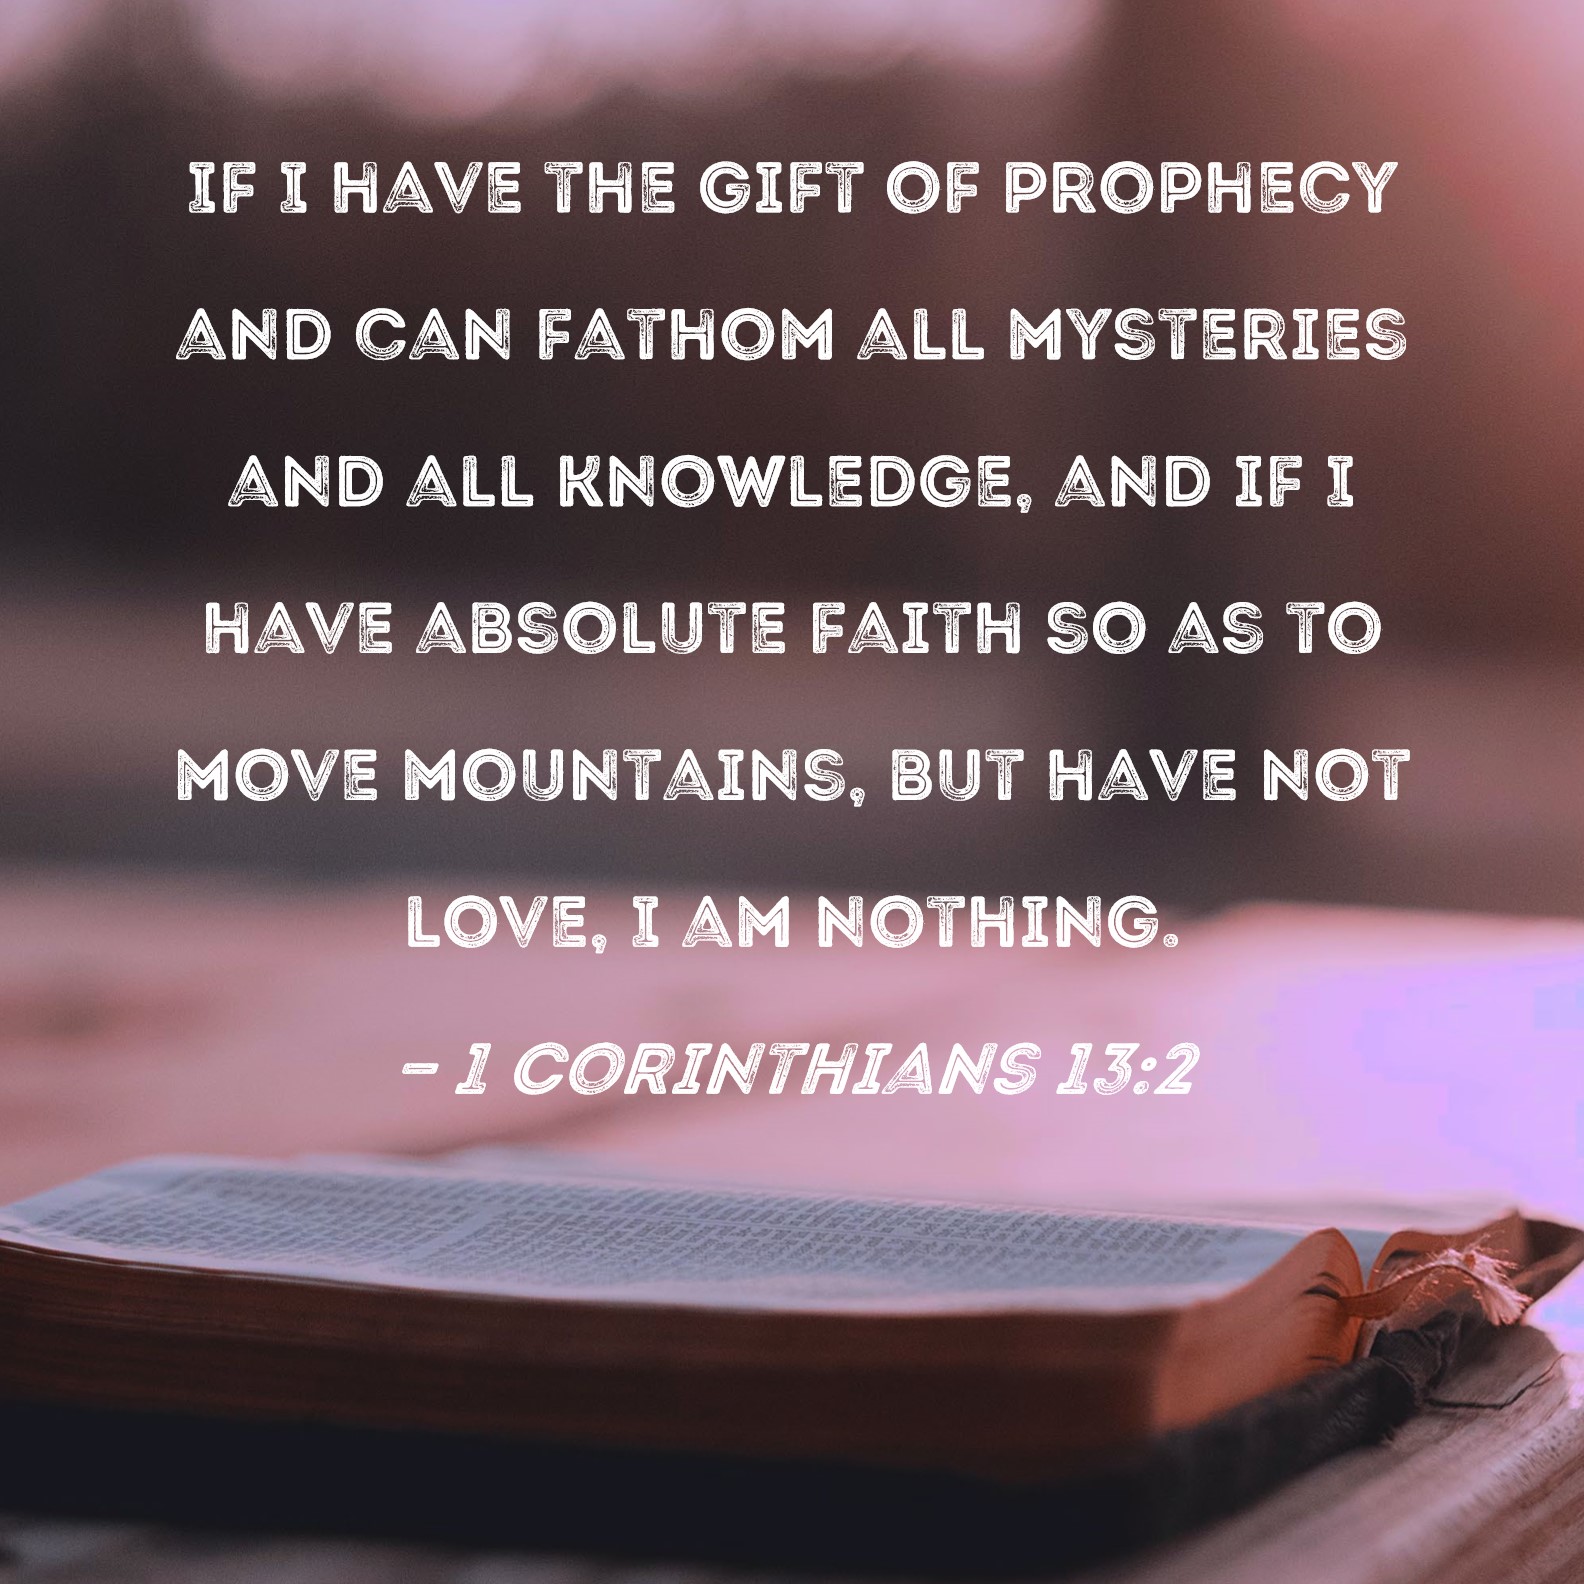 1-corinthians-13-2-if-i-have-the-gift-of-prophecy-and-can-fathom-all